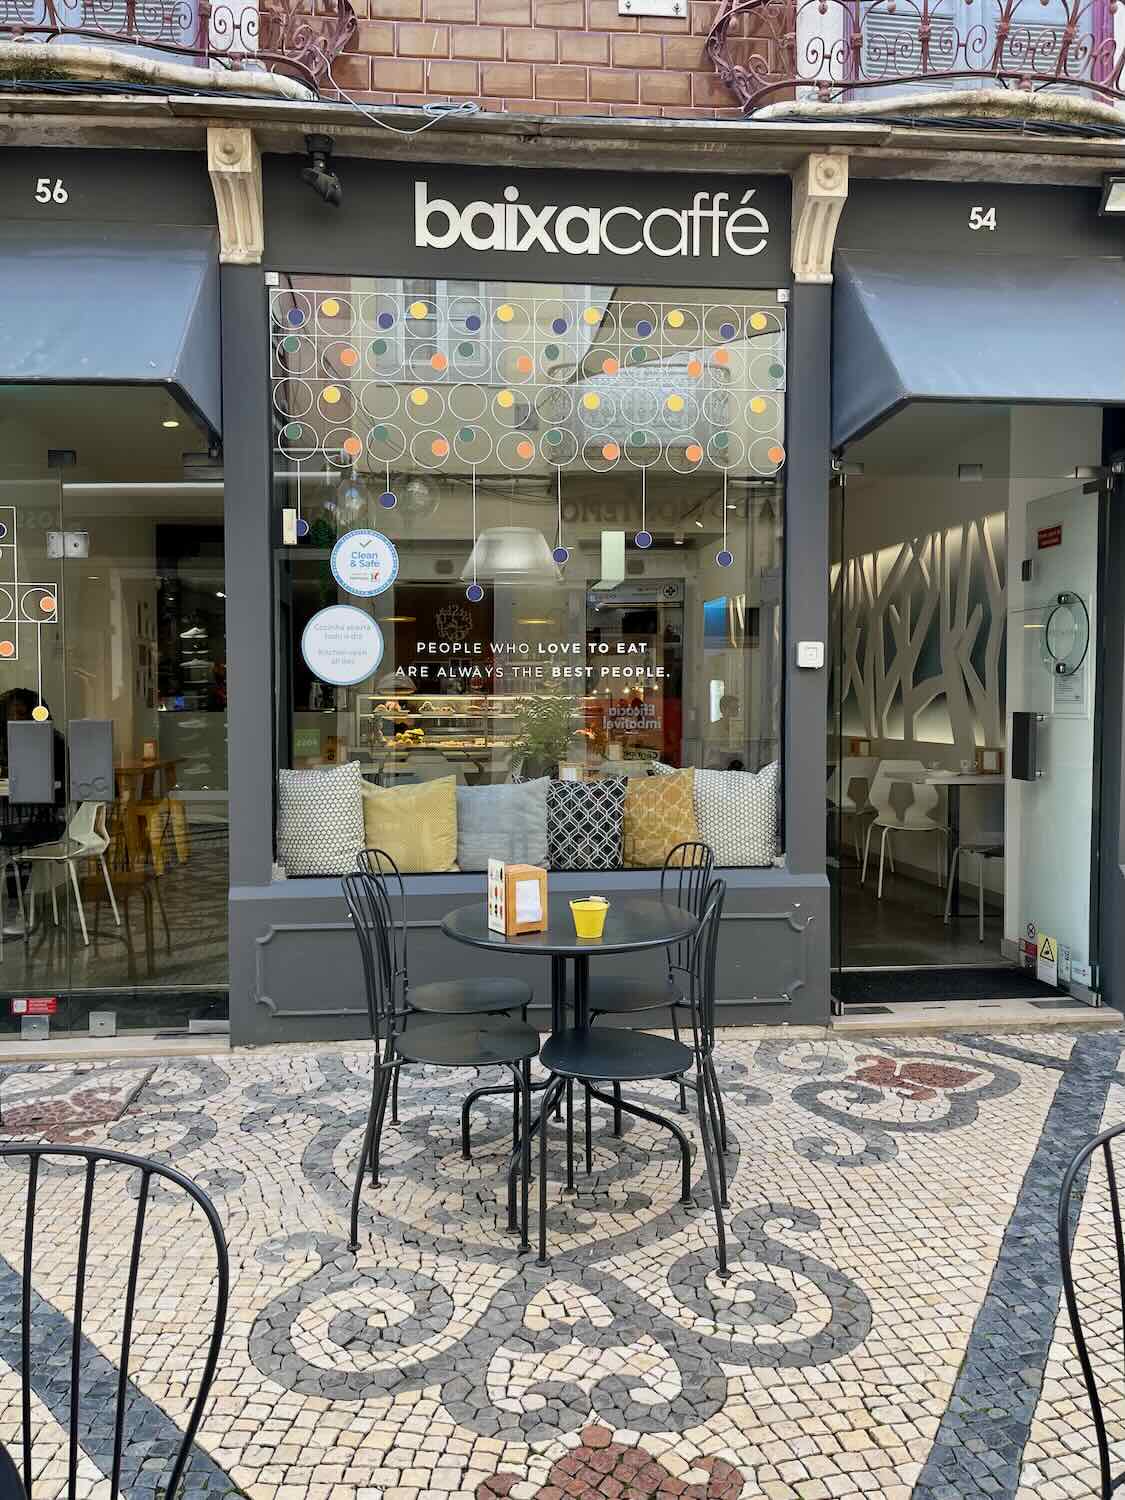 Entrance to Baixa Café in Faro, with its modern gray storefront and decorative window design featuring circles of multiple colors; outdoor seating available on a mosaic-tiled sidewalk, a sign quoting 'People who love to eat are always the best people.